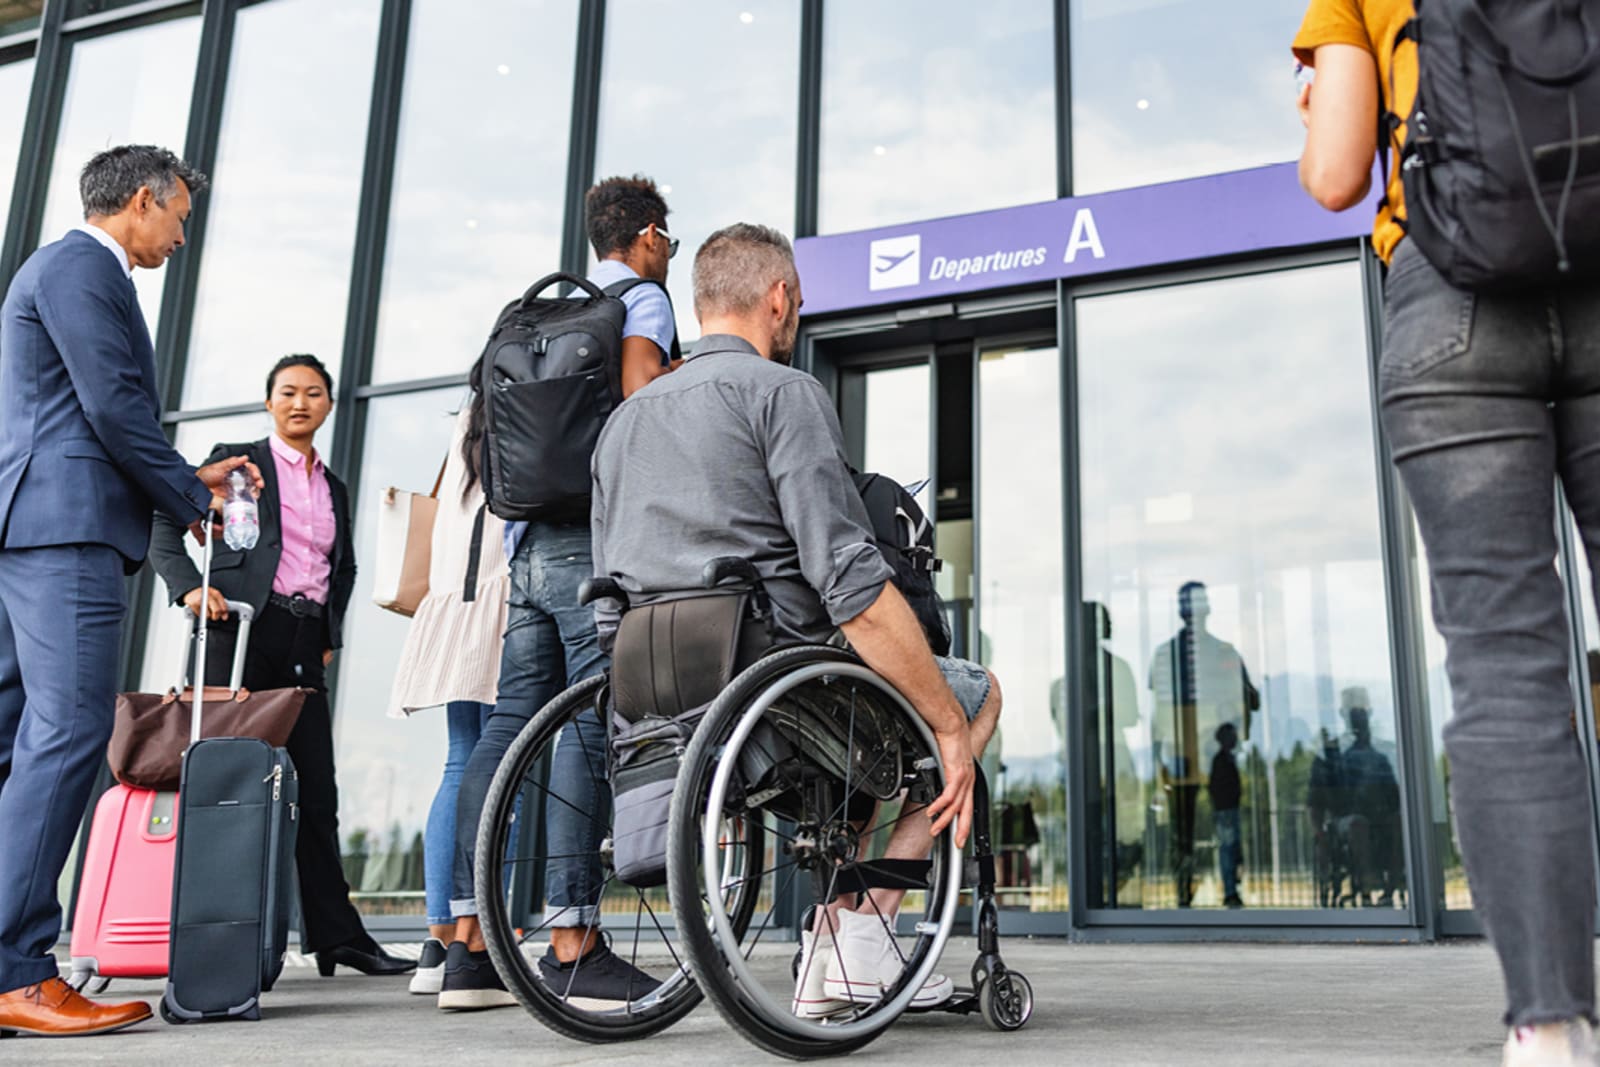 A wheelchair user entering the airport alongside other travellers